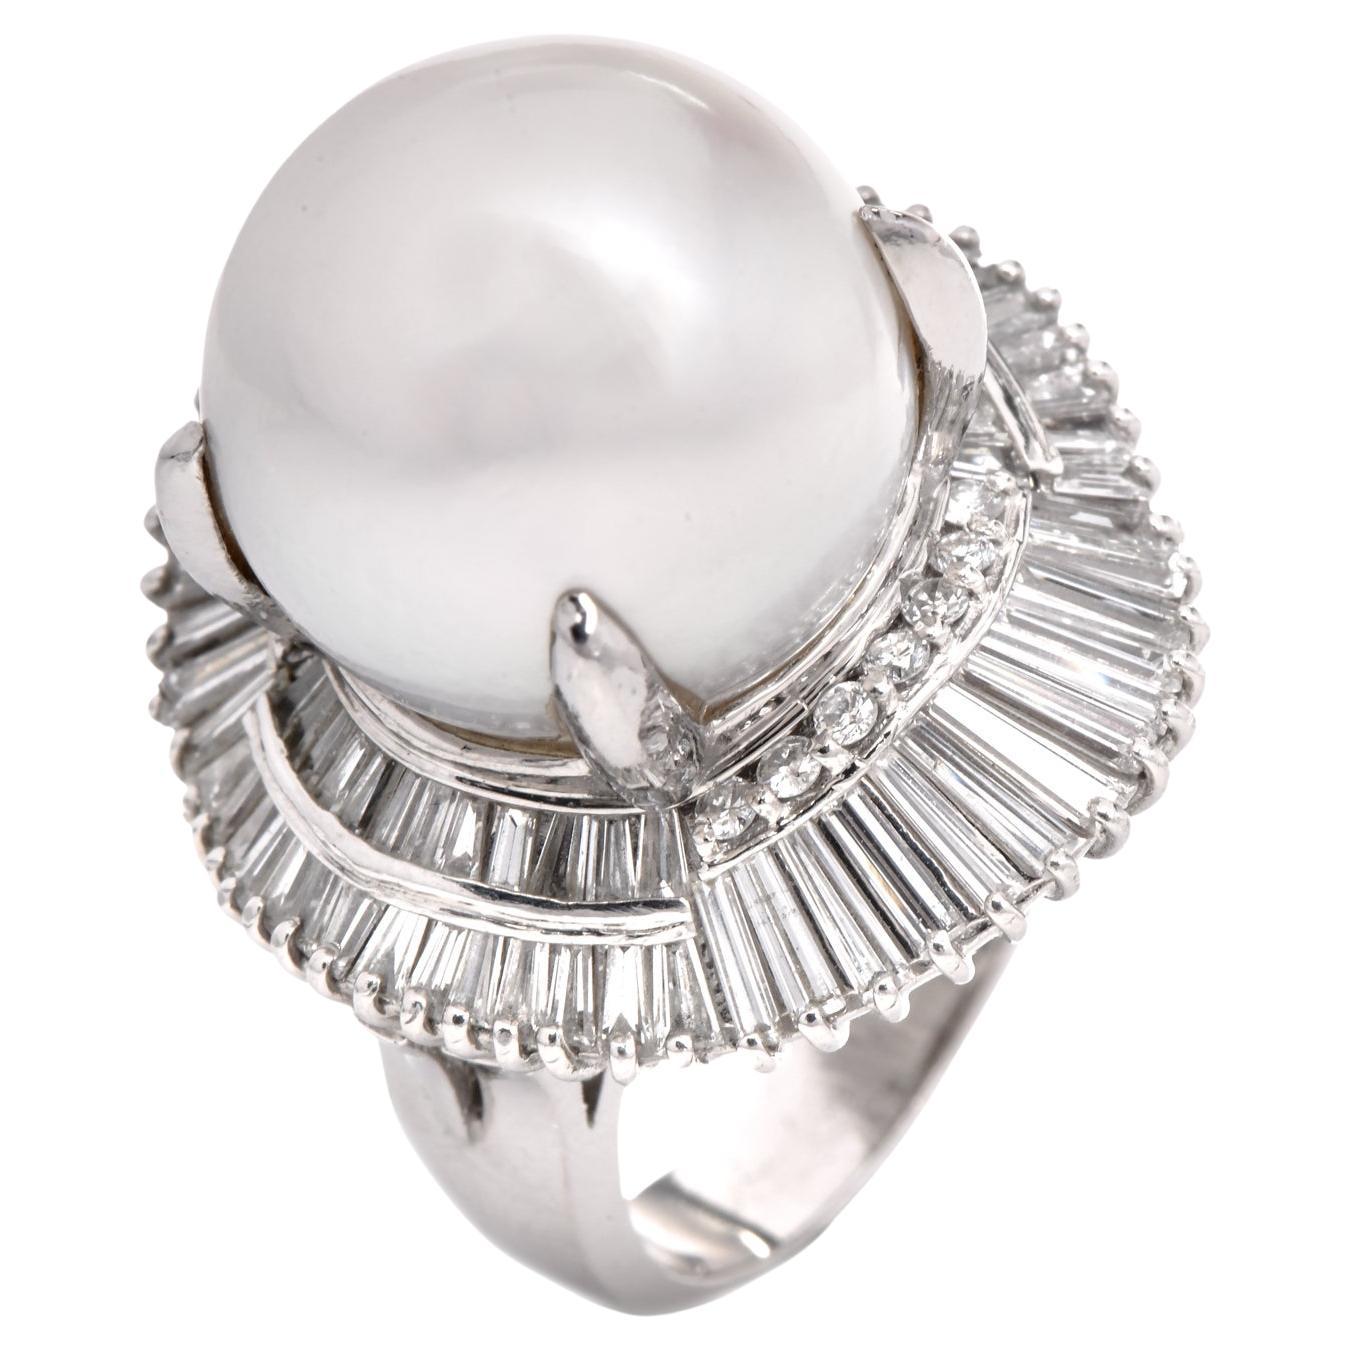 This impressive ballerina ring is crafted in solid platinum, weighing 25.7 grams and measuring 21mm wide and 19mm high. This alluring cocktail ring is centered with a lustrous south-sea pearl of cream-white color, measuring 15mm in diameter,